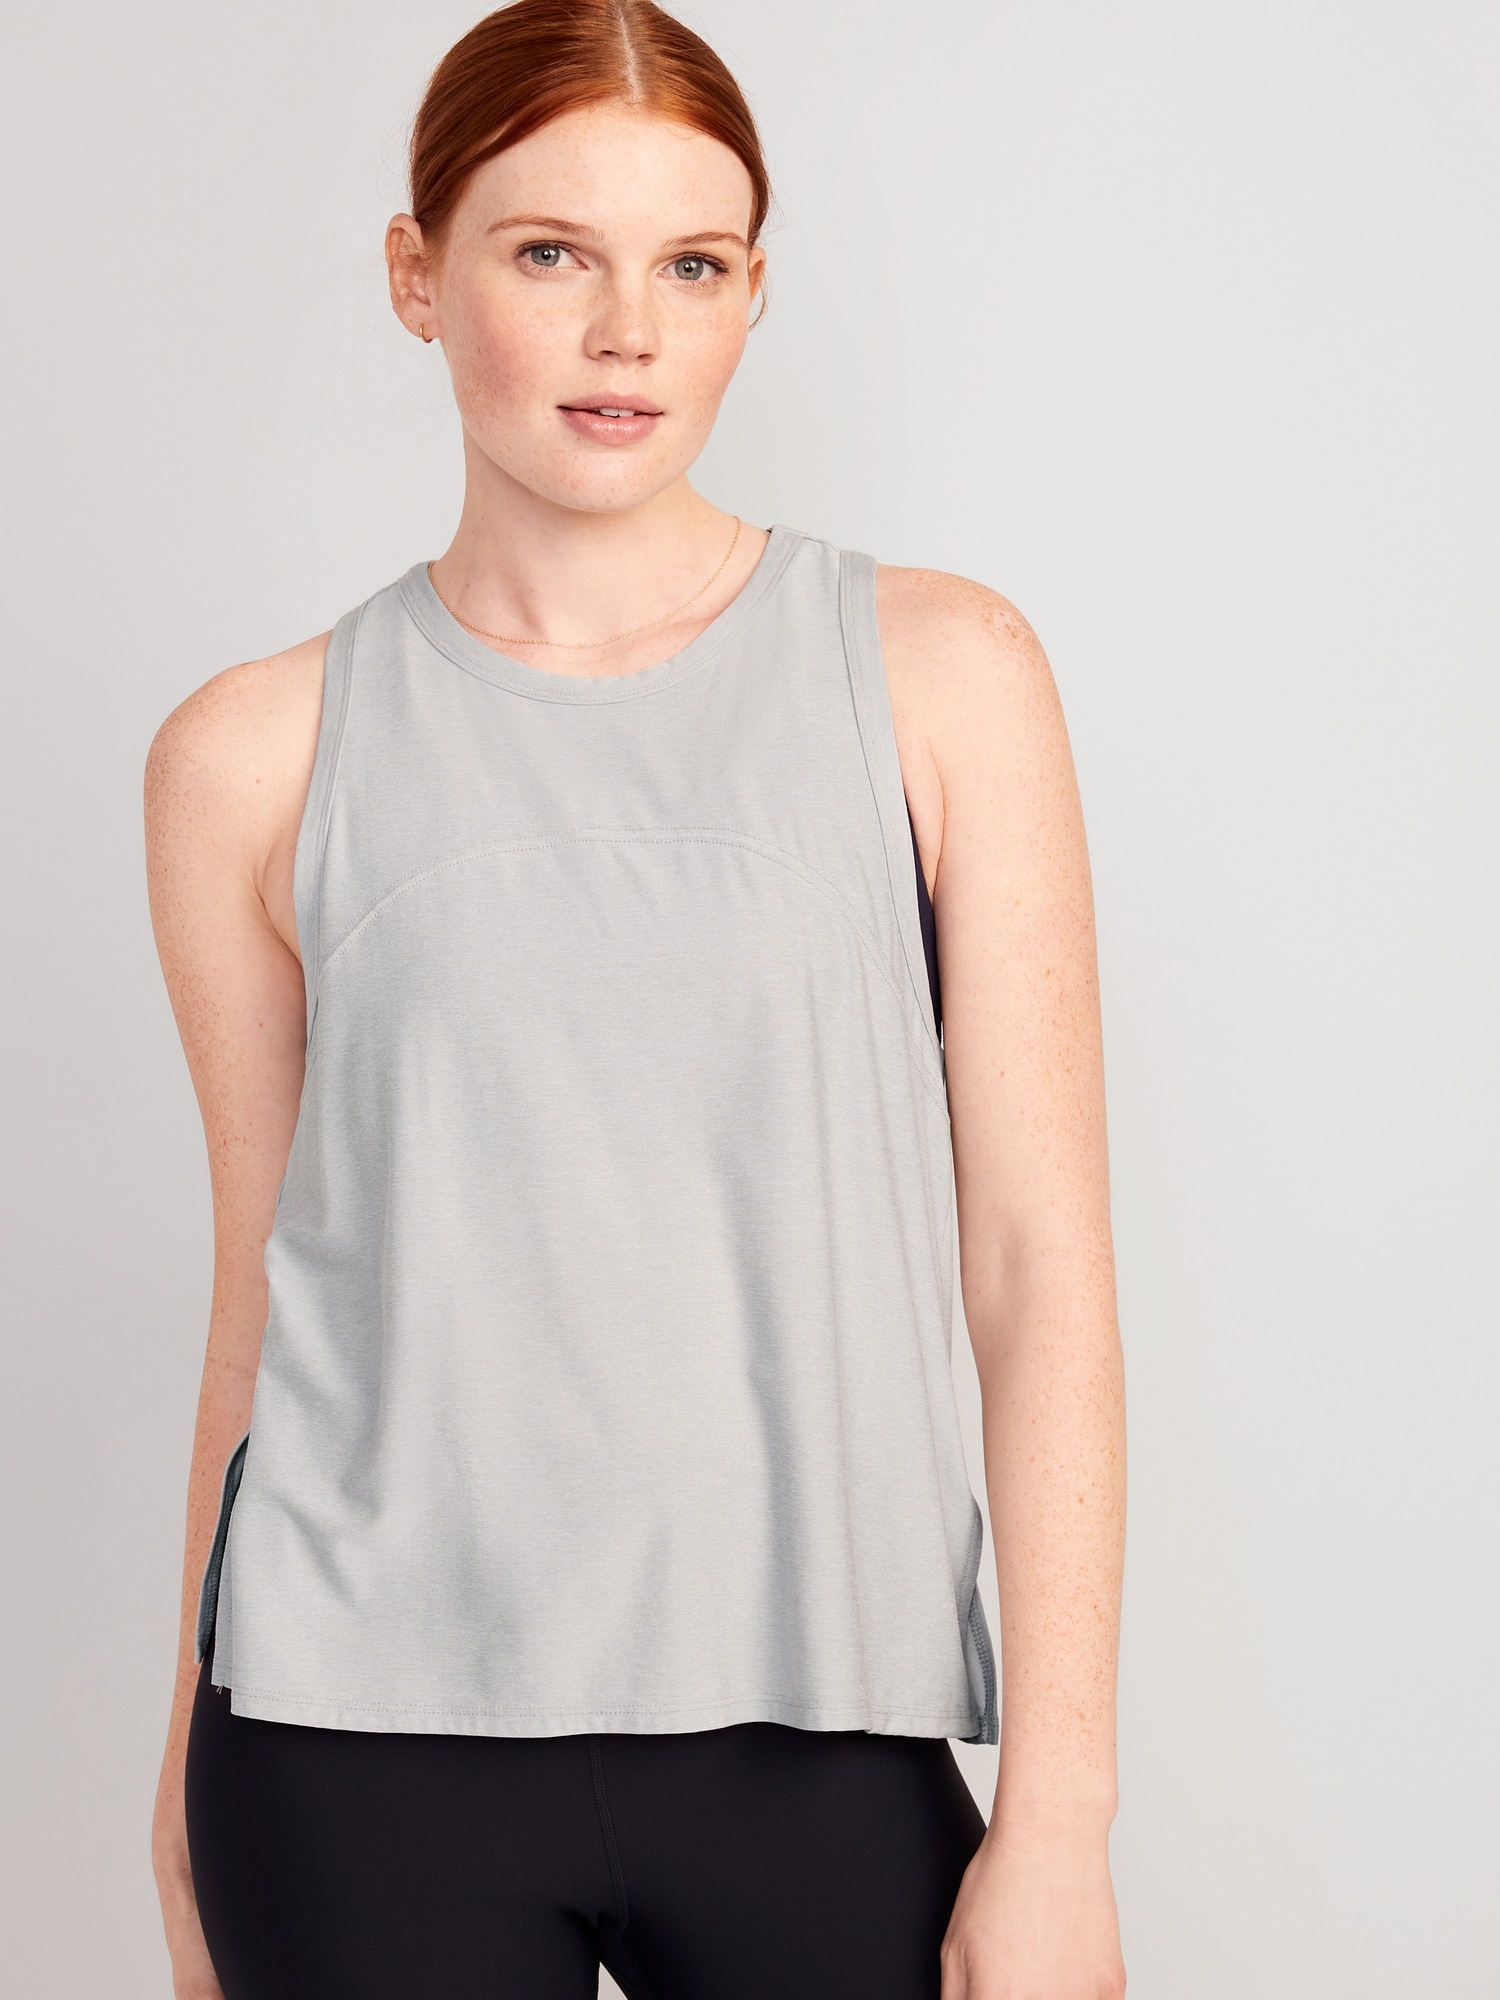 Women\'s Loose Tops Tank Fit Old Navy 